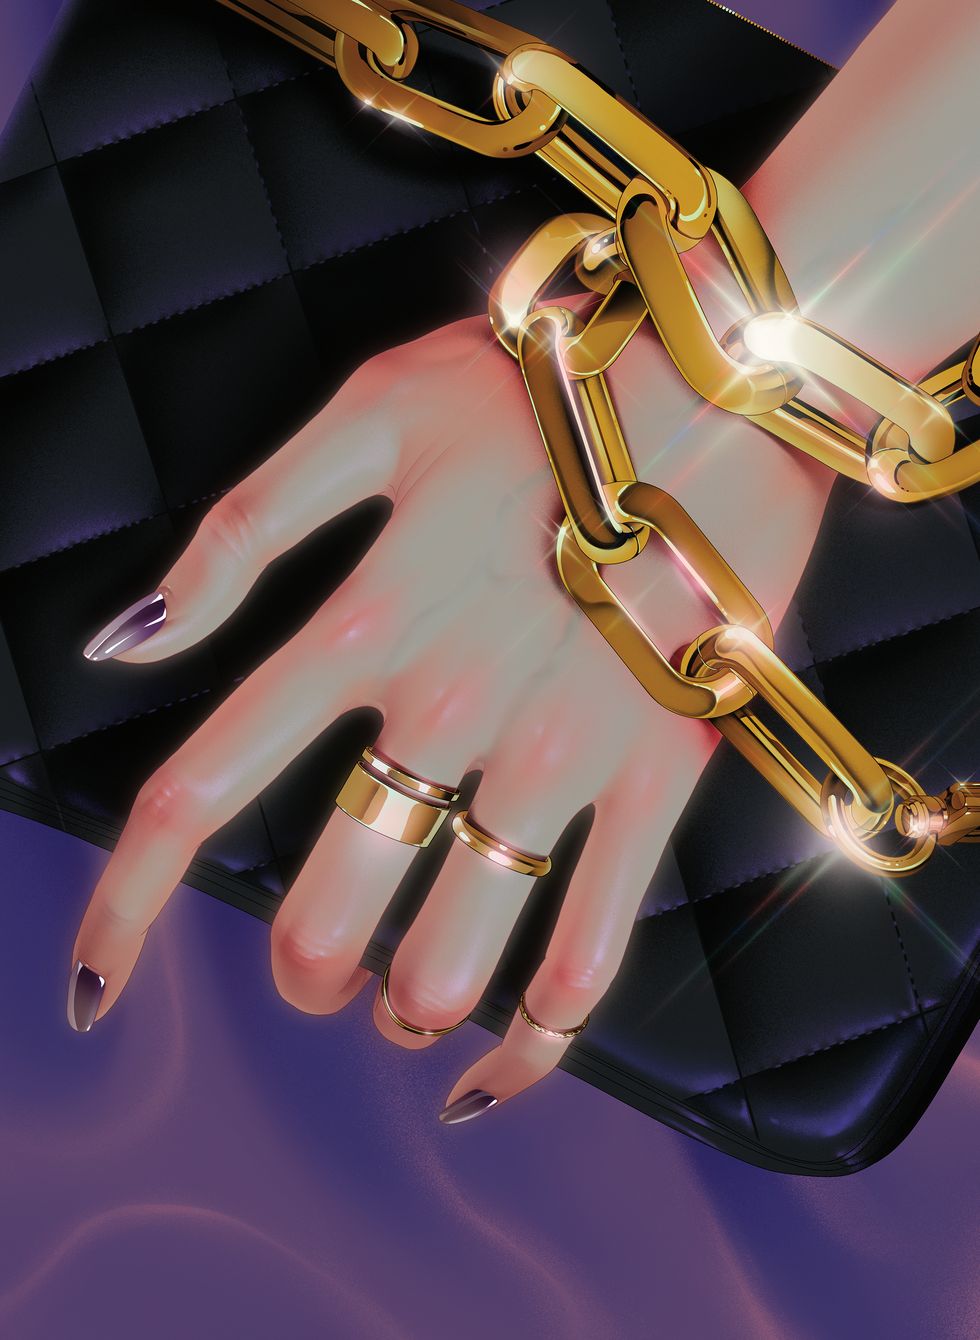 golden handcuffs, hands chained, worklife balance, gilded cage, wall street, career, power dynamics, money, wealth disparity, power struggle, manipulation